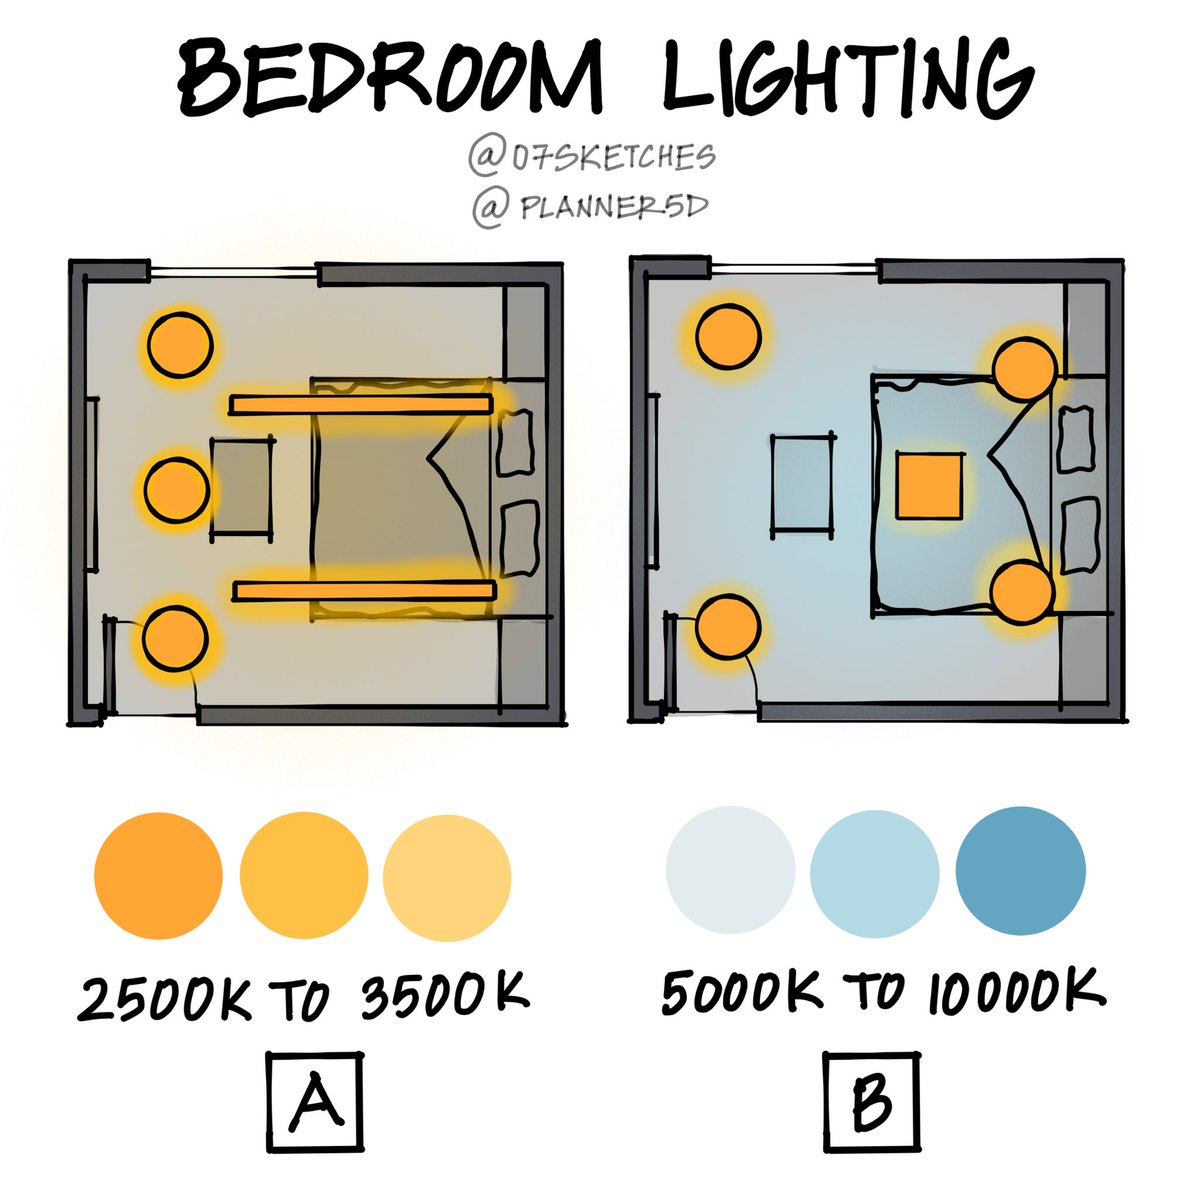 Bedroom lighting, A or B? Which one and why? 
Collaborative post with @Planner5D